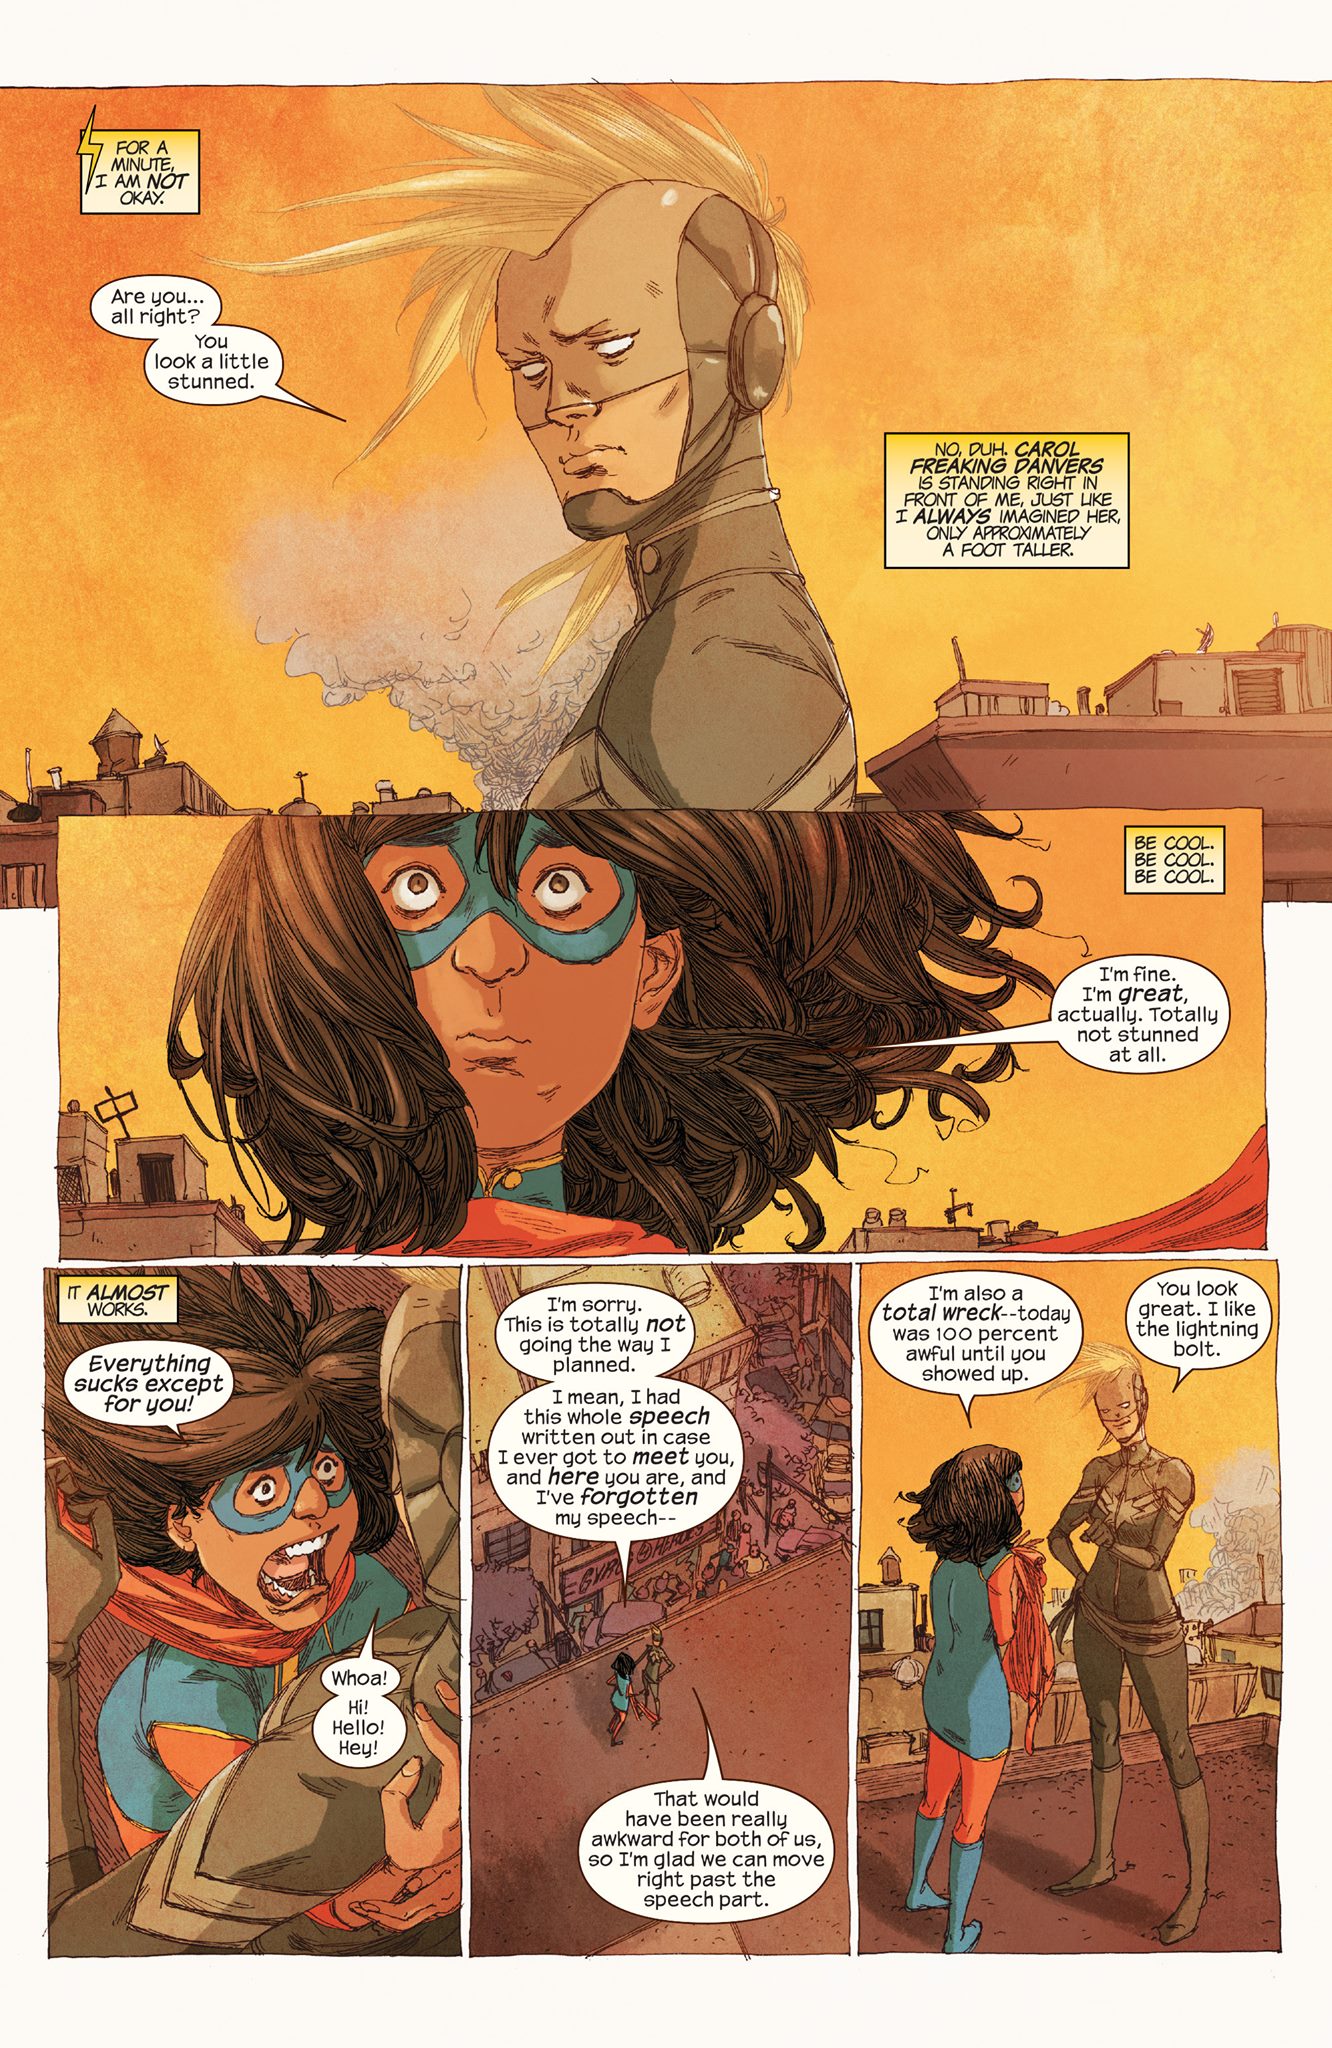 Ms. Marvel #17 Review: Last Days - Part II - The Geekiary